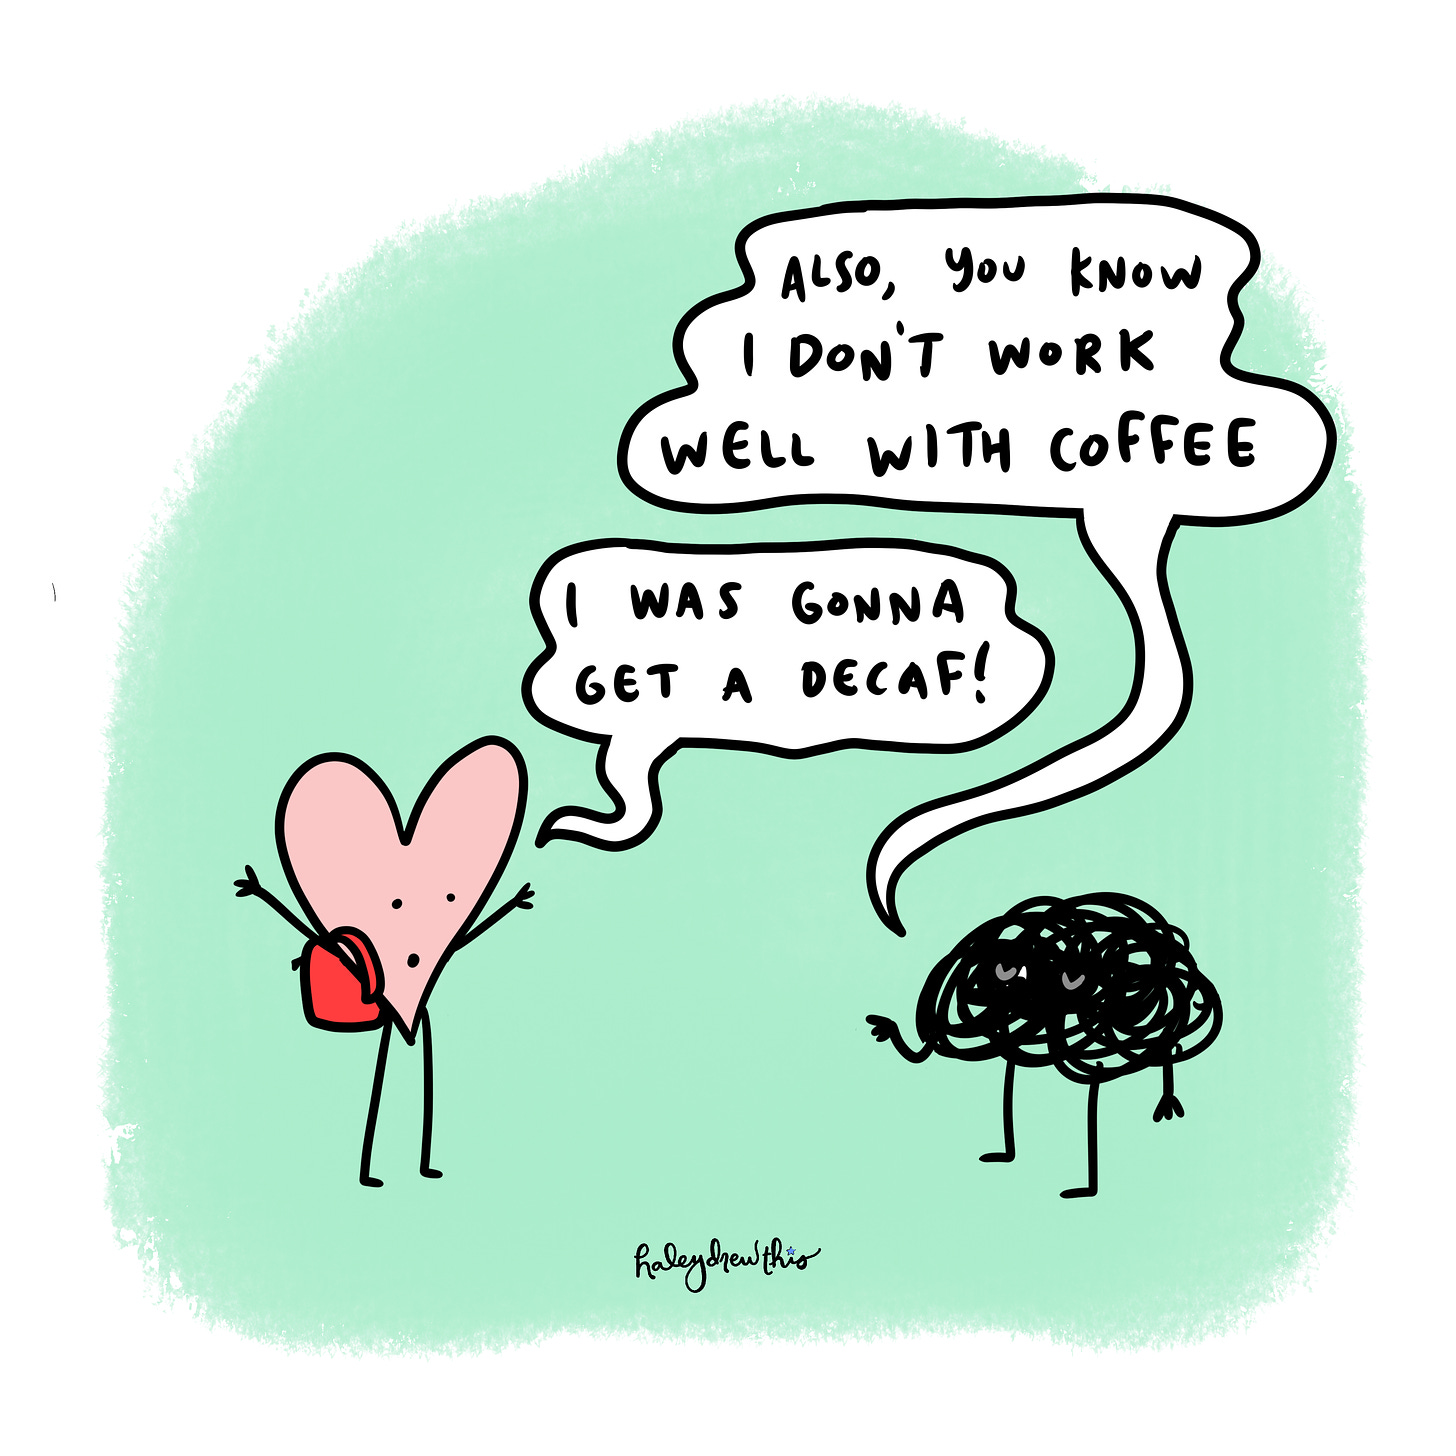 Anxiety: Also, you know I don’t work well with coffee. Heart; I was gonna get a decaf!